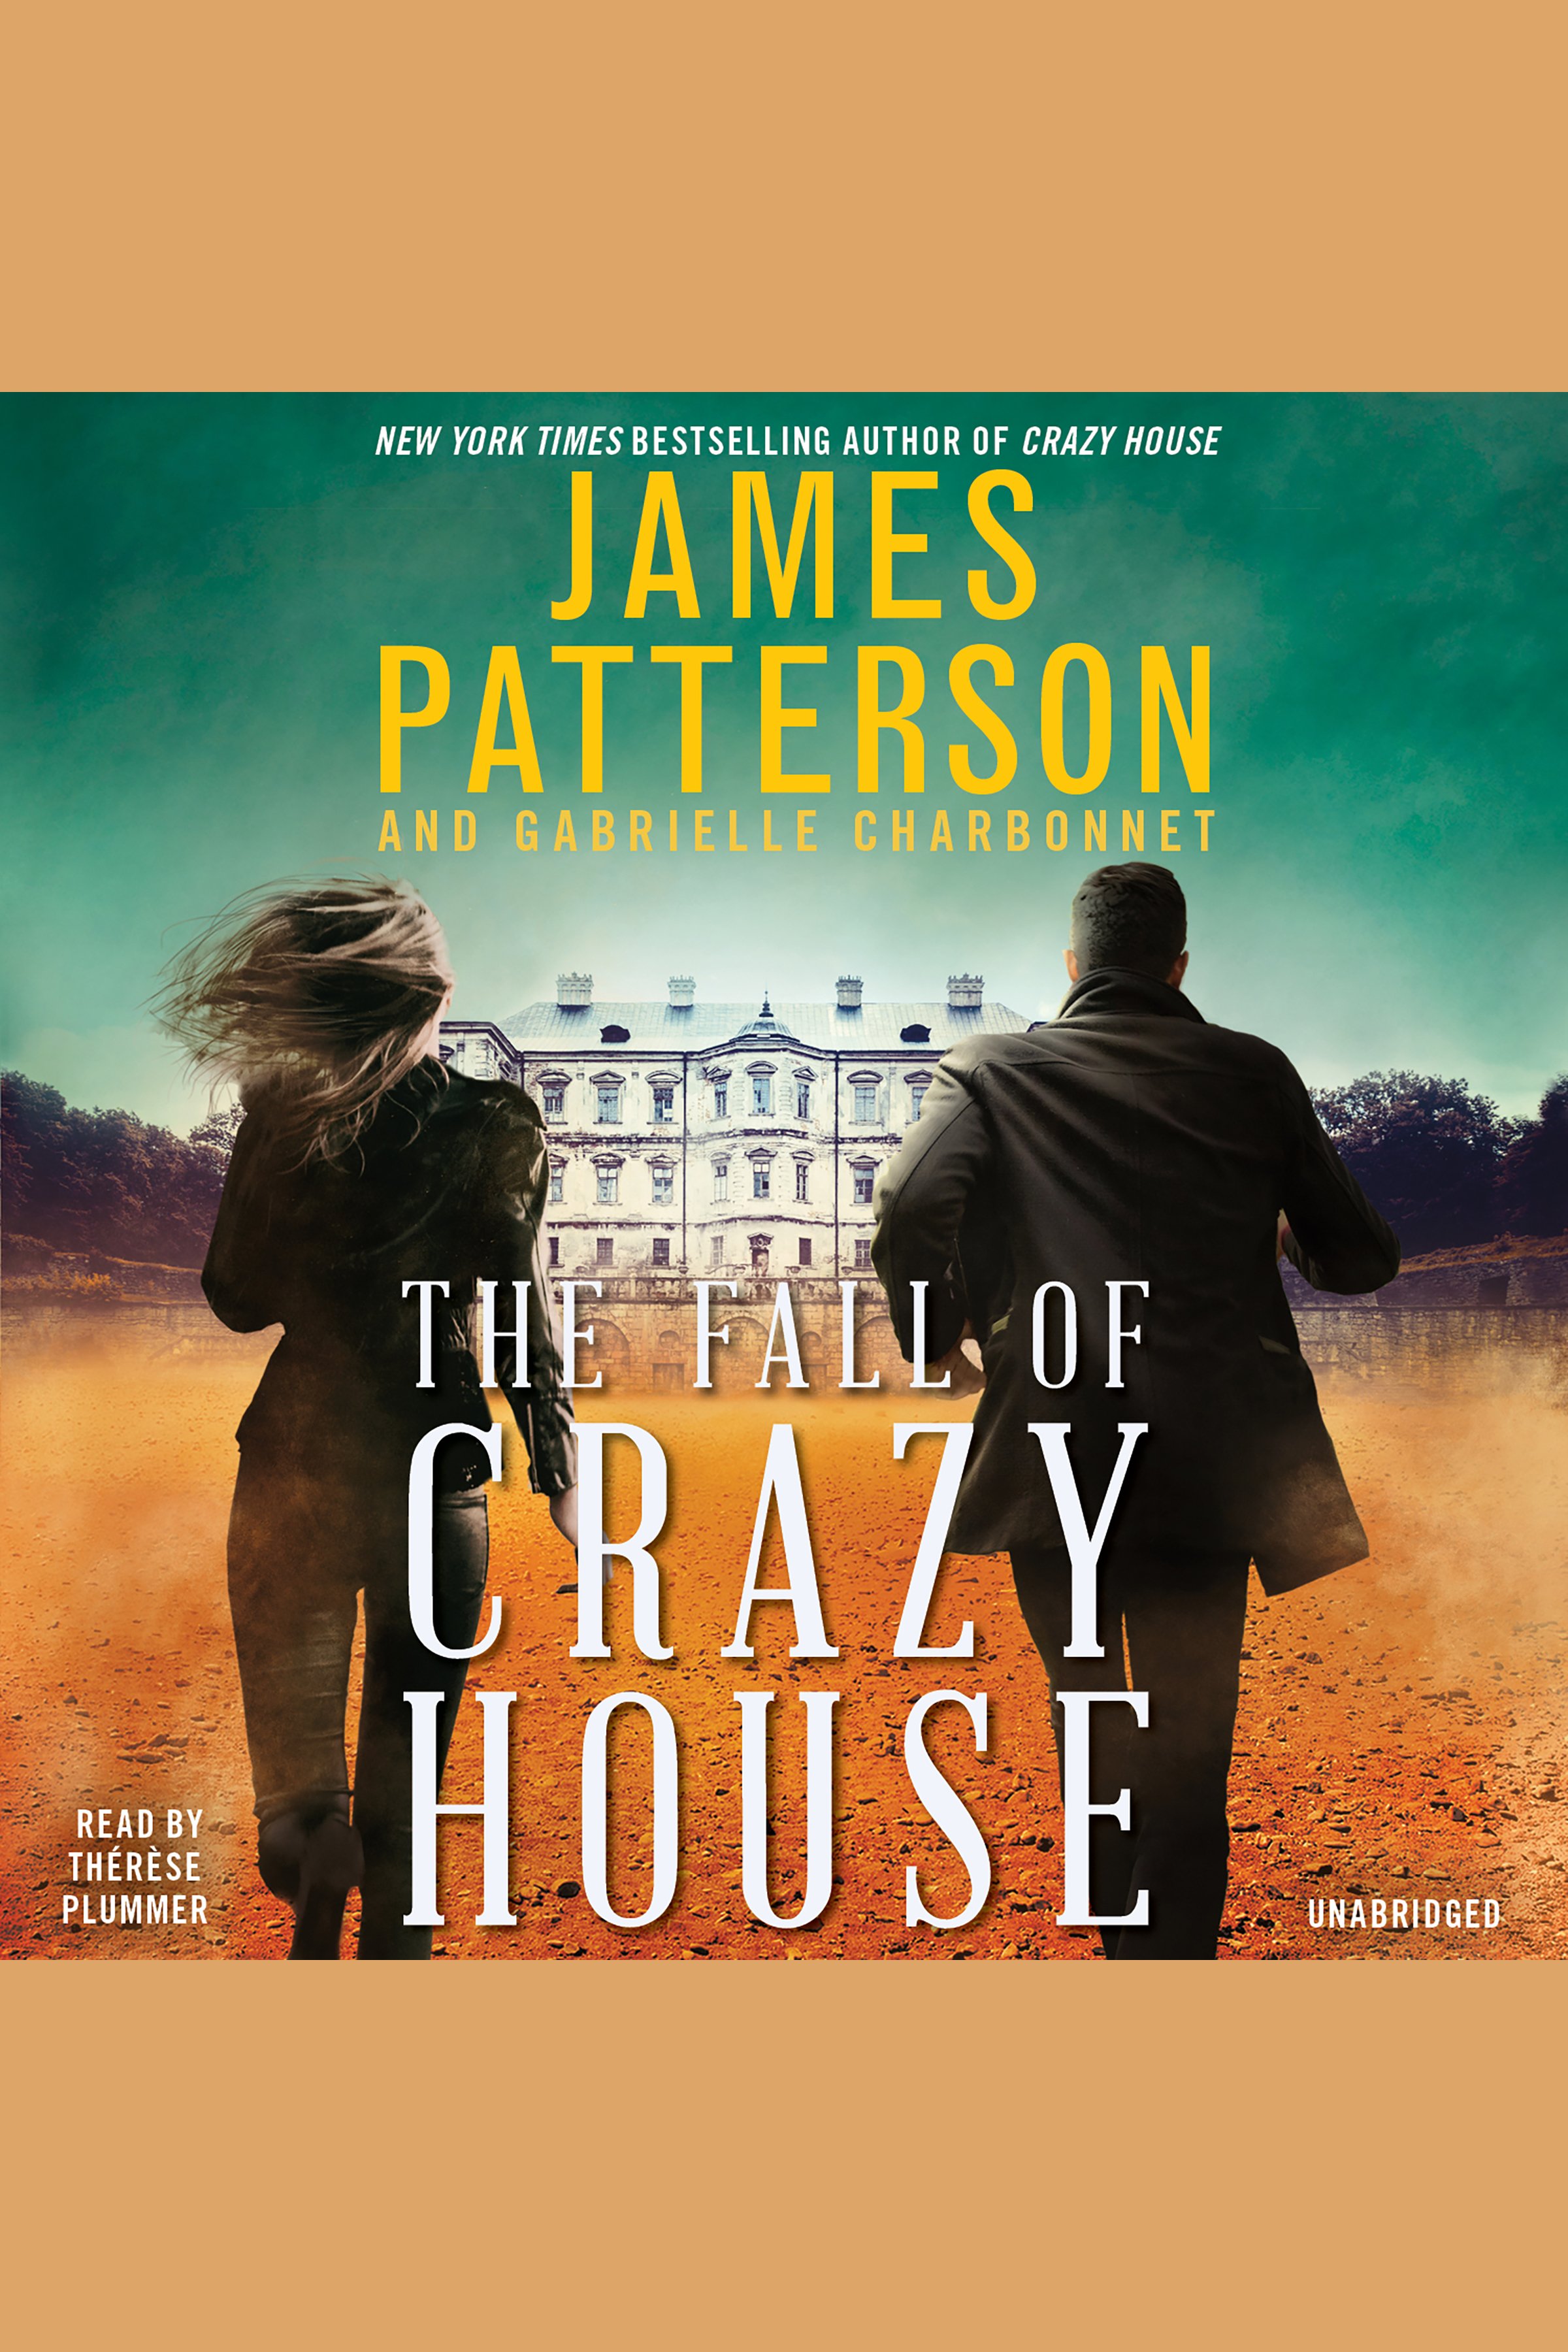 The fall of crazy house cover image